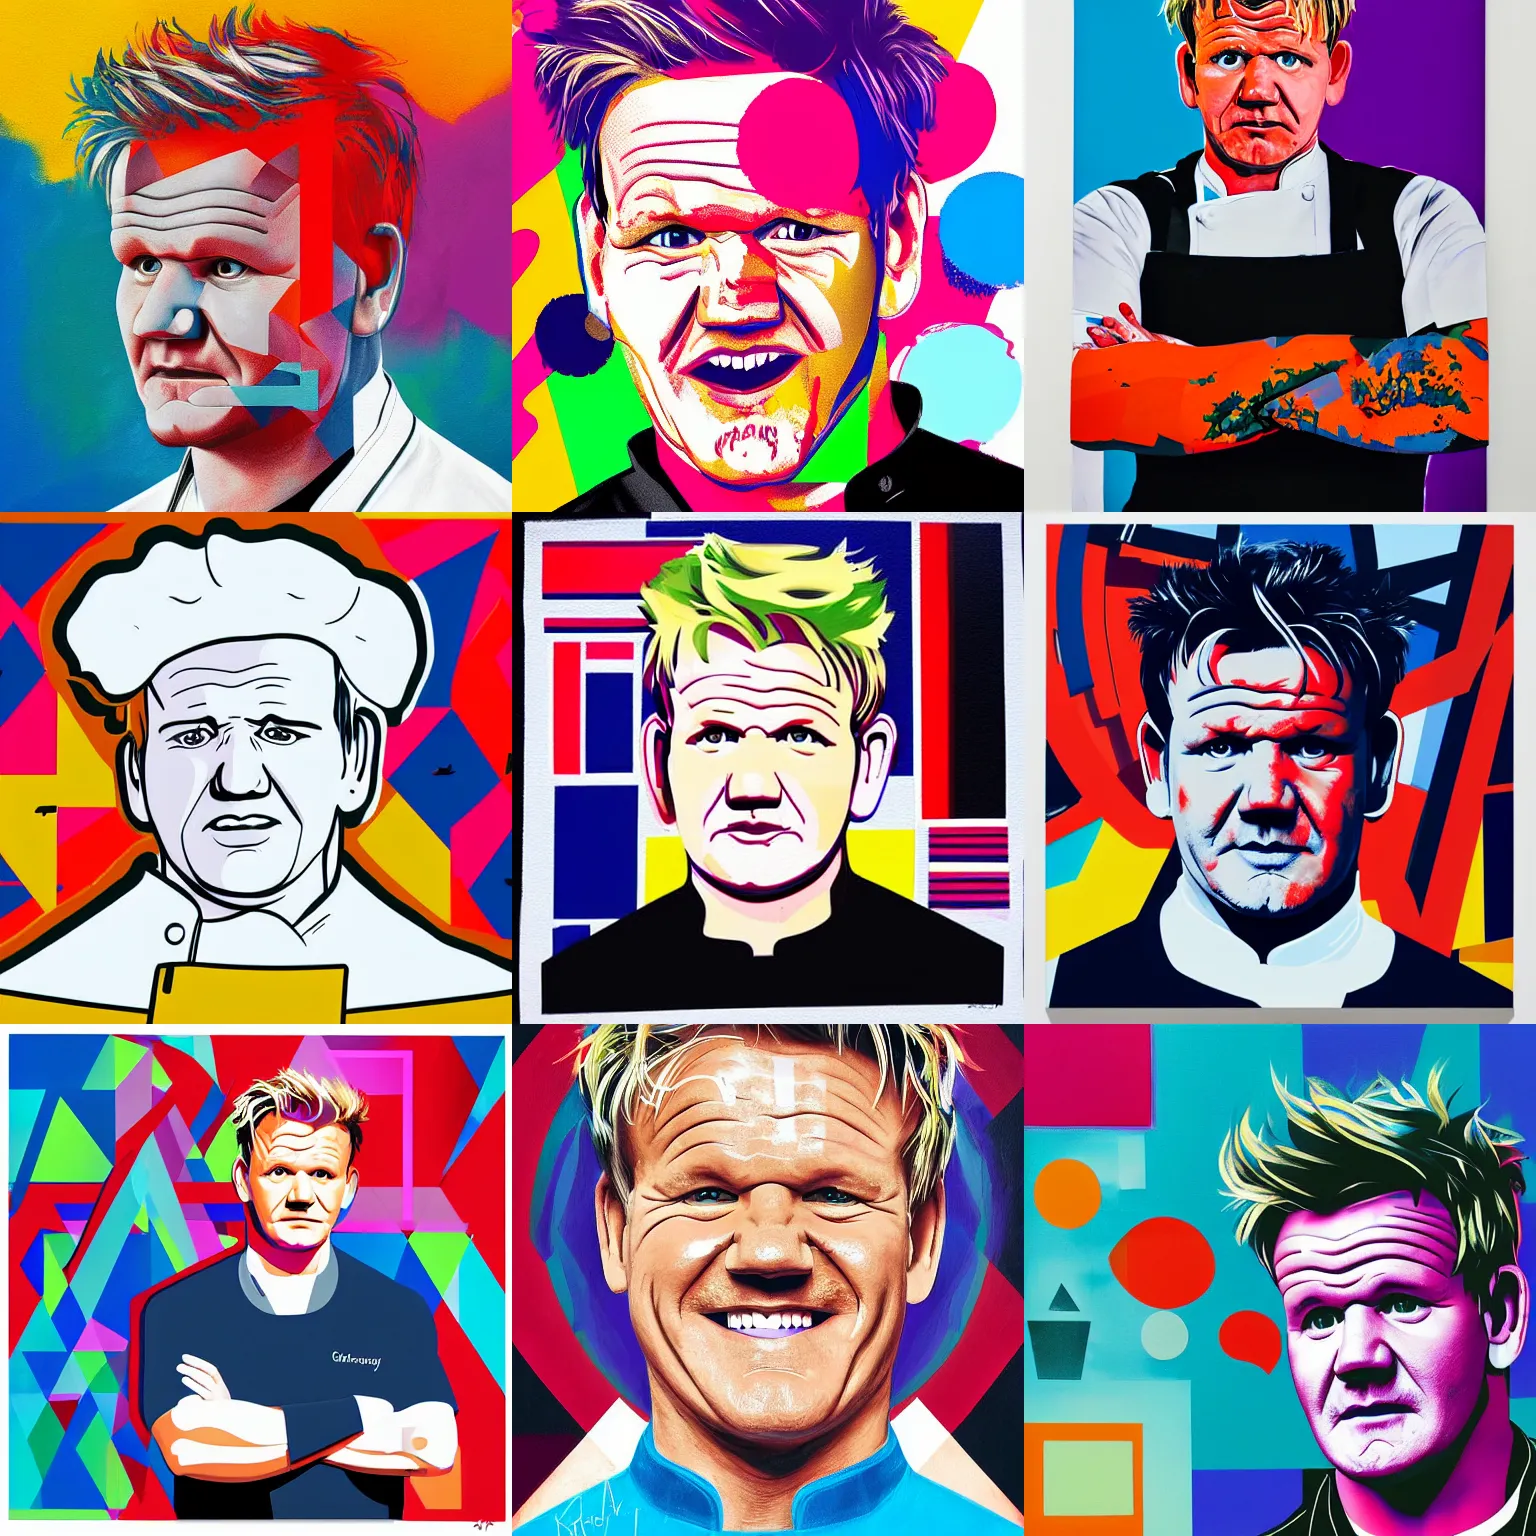 Prompt: A portrait of Gordon Ramsay in a chef uniform | geometric shapes, vibrant colors, spray paint, rounded corners | museum art